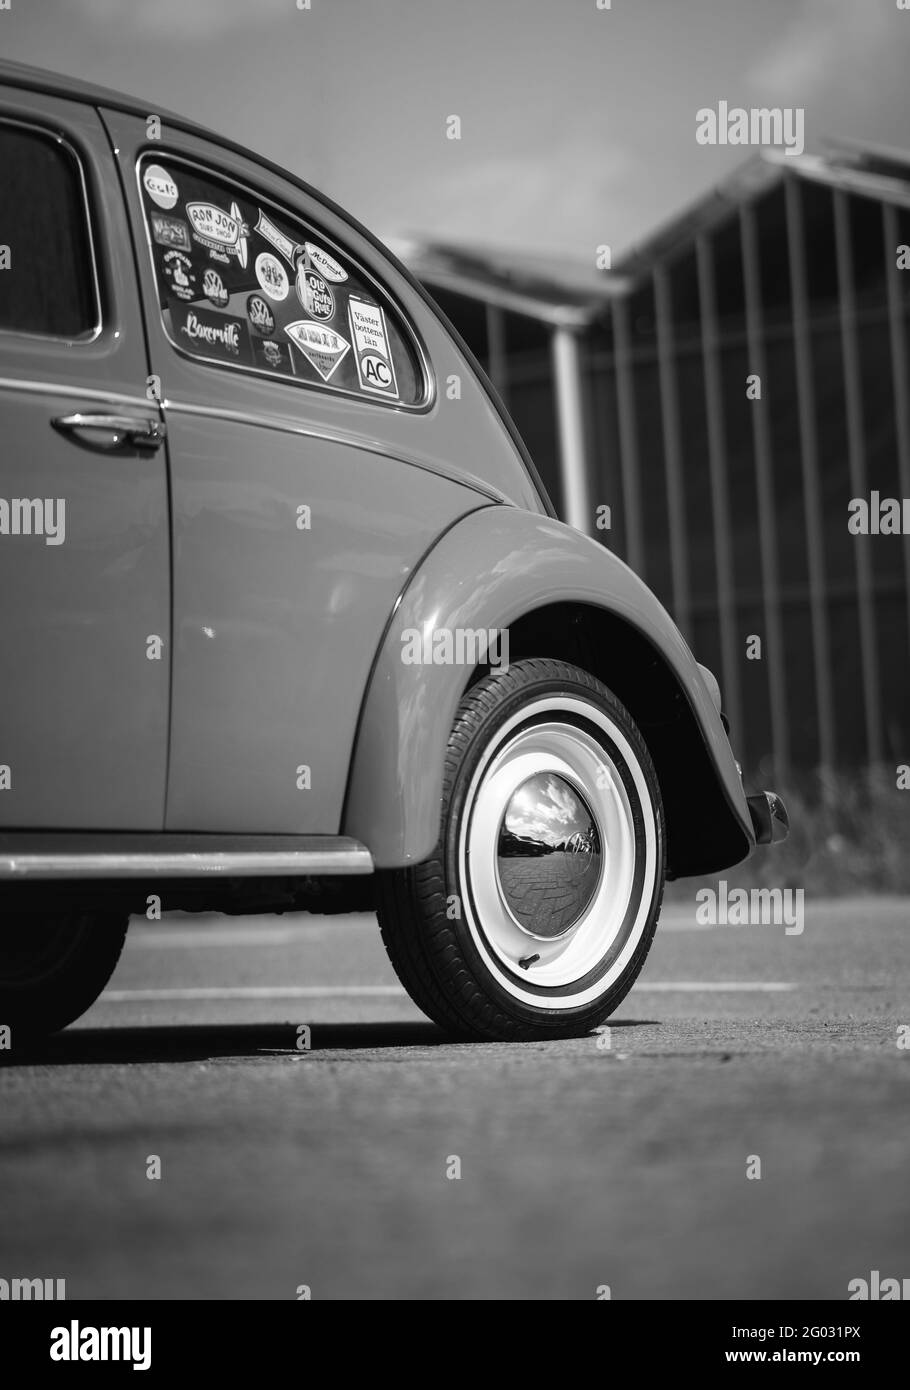 ZOETERMEER, NETHERLANDS - May 20, 2021: Retro car Volkswagen Beetle black and white shot of a rear wheel. Stock Photo